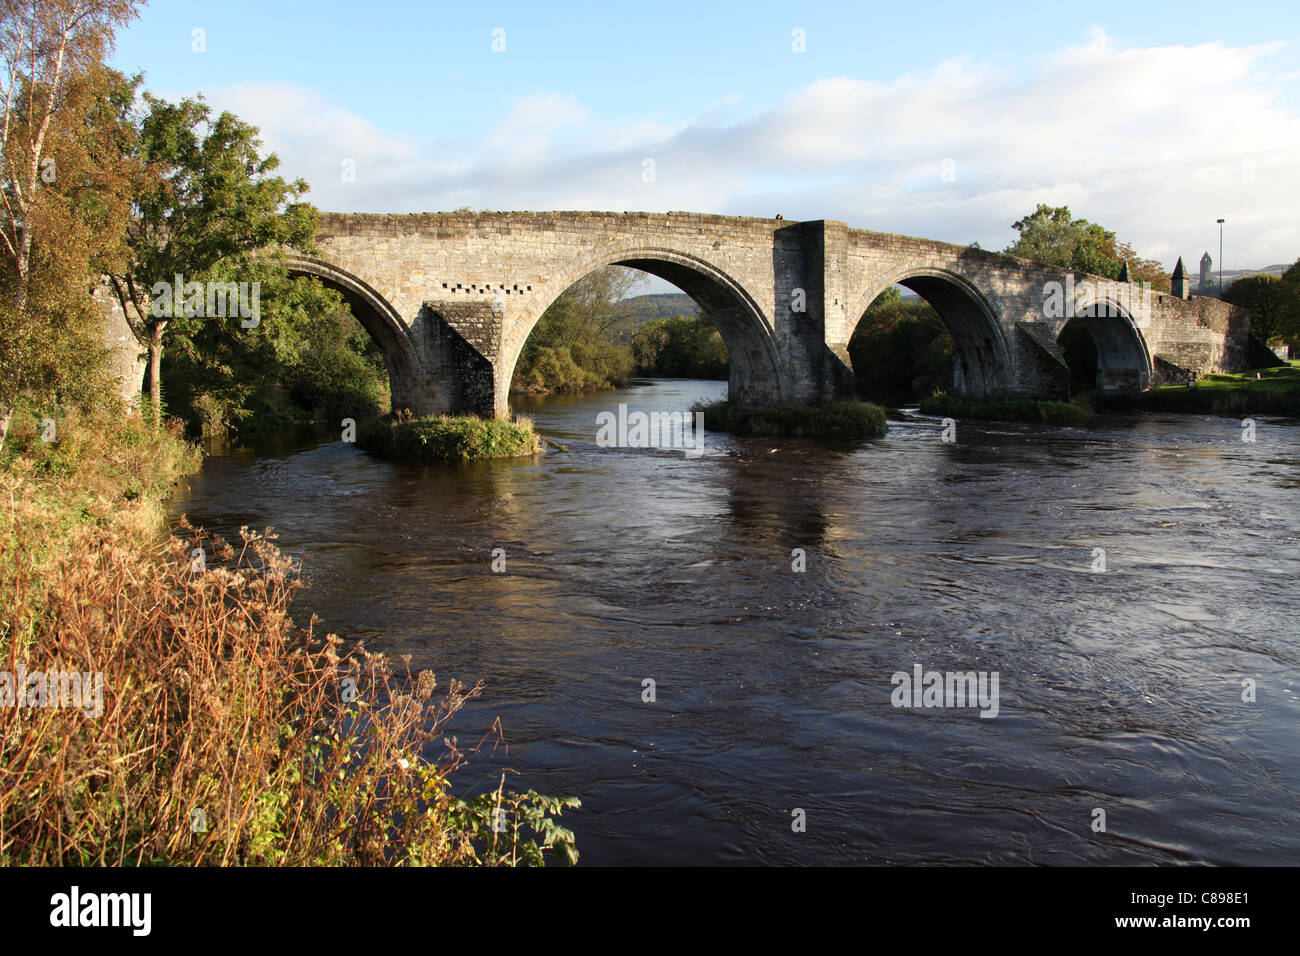 City of Stirling, Scotland. Dating from the early 16th century the Grade A listed Old Stirling Bridge over the River Forth. Stock Photo